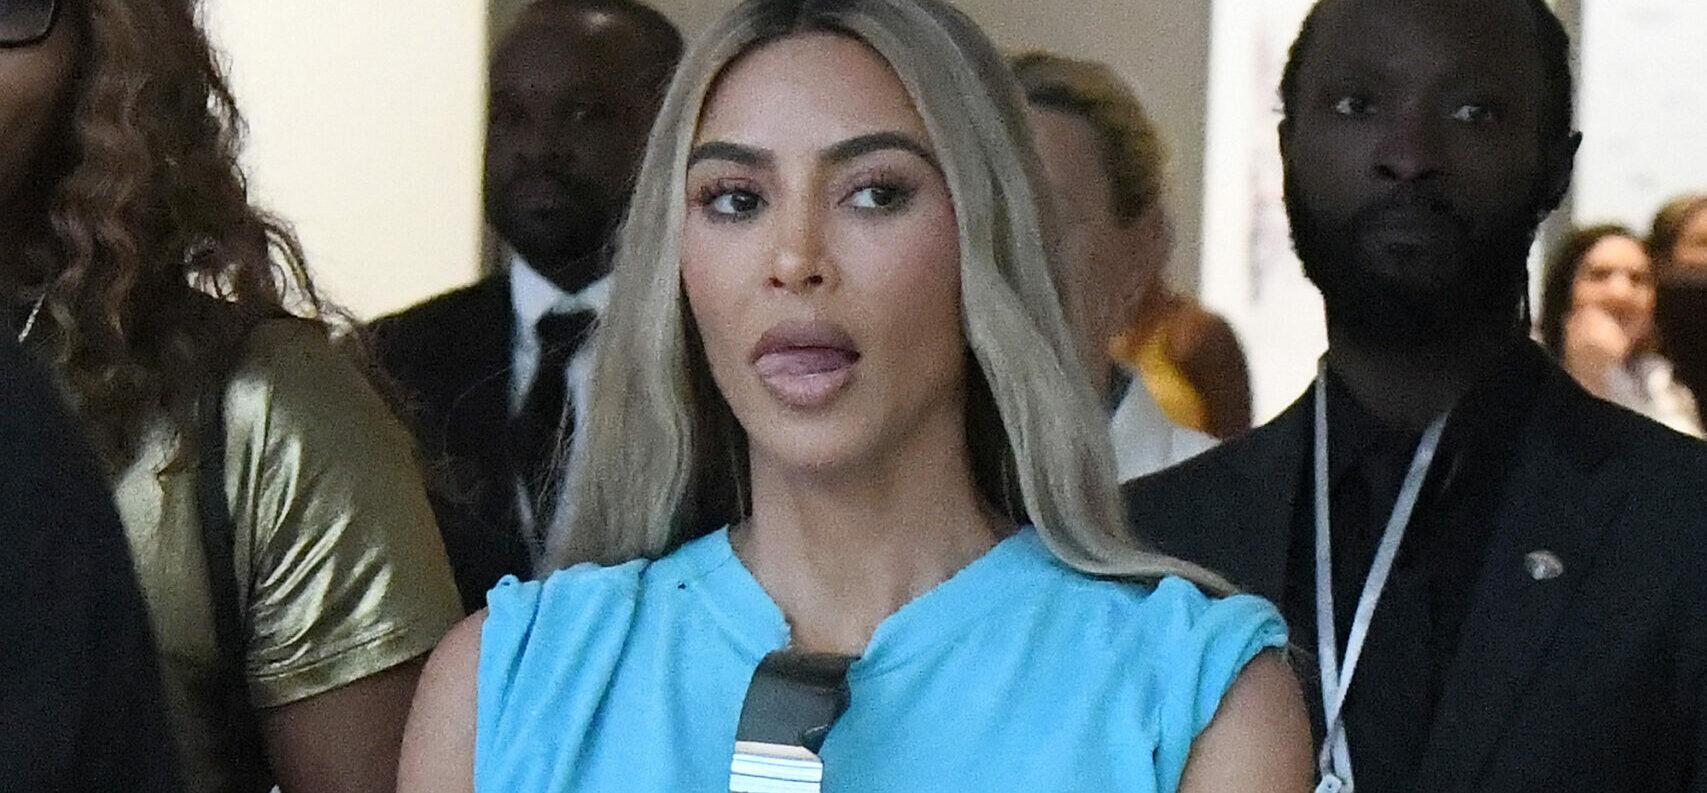 Kim Kardashian Is ‘Fulfilled’ With Kids, But Twitter Doesn’t Buy It